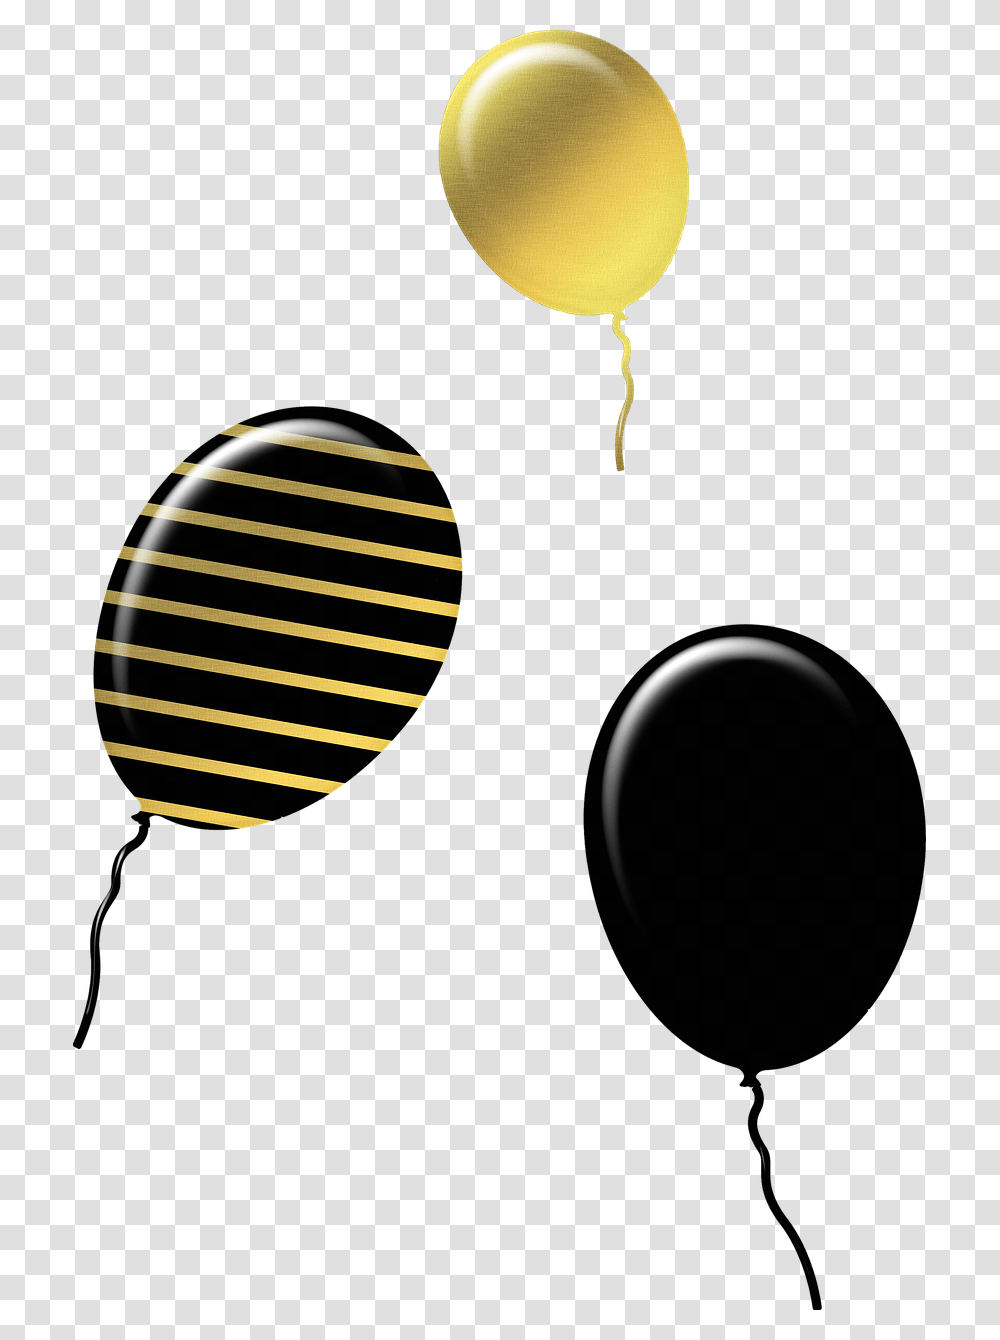 Gold And Black Balloons Ballons Free Image On Pixabay Circle, Astronomy, Microphone, Electrical Device, Outer Space Transparent Png